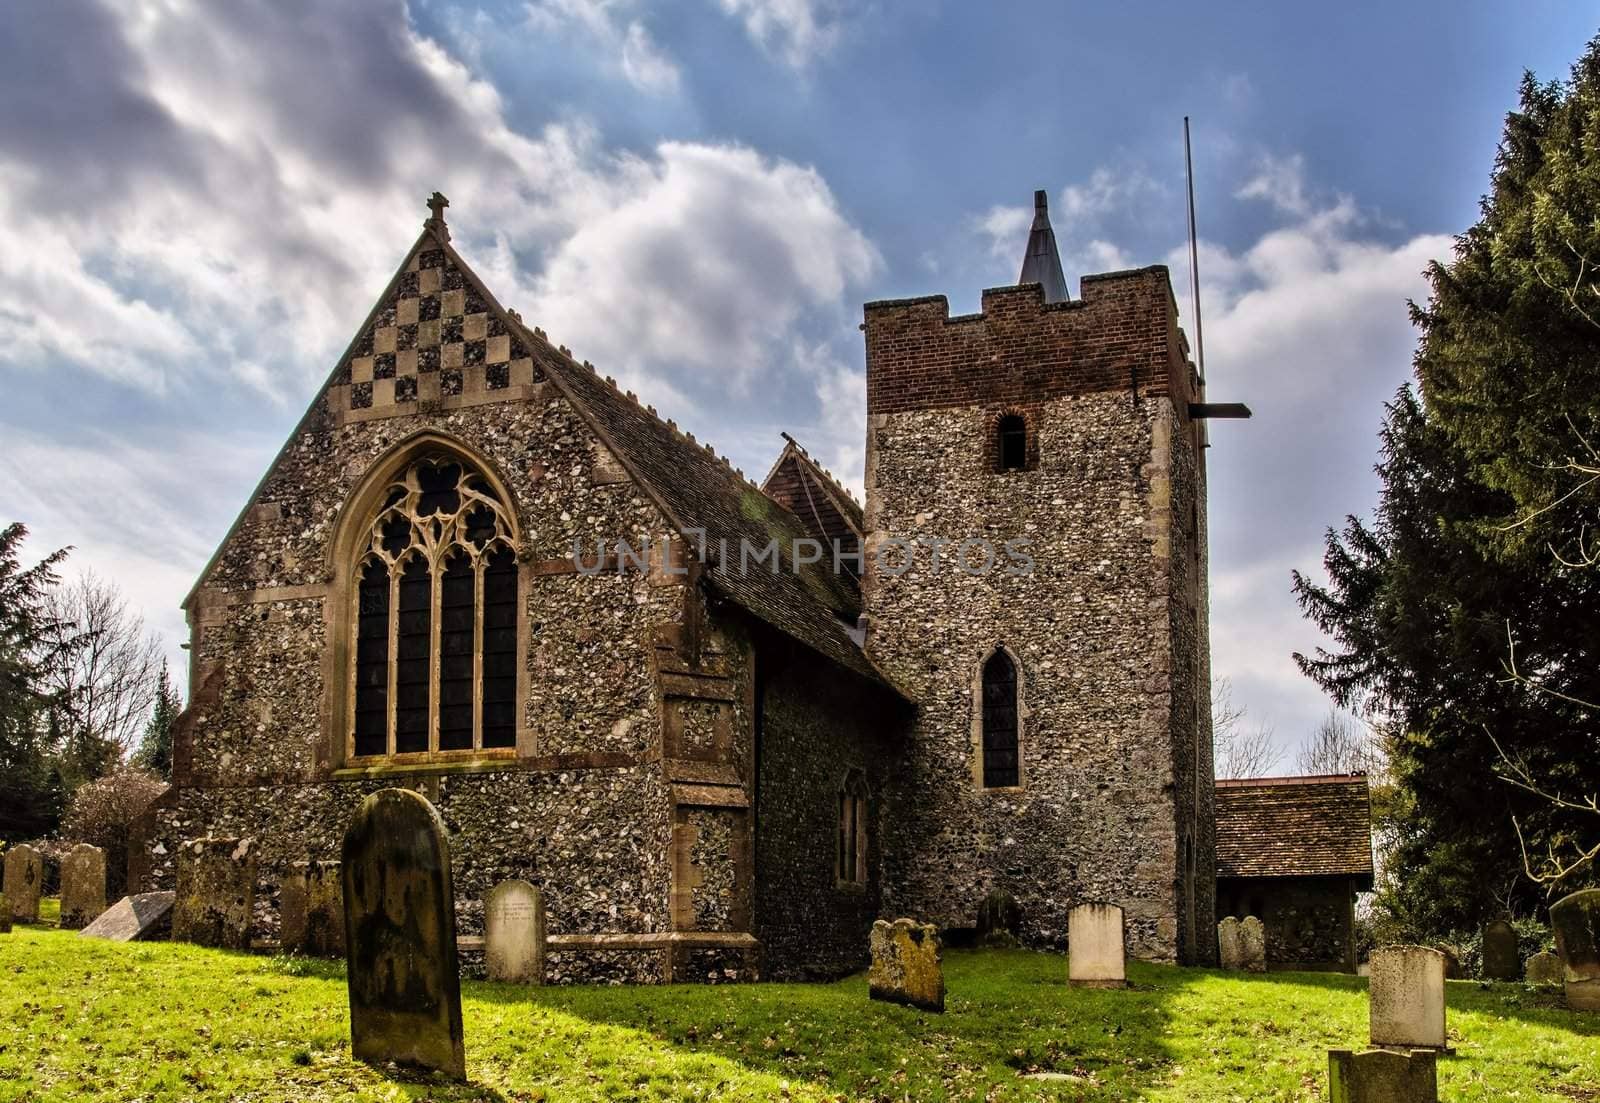 St.Mary the blessed virgin is a small Norman church siiting on a hilltop about 3/4 of a mile from the rural hamlet / village of Crundale in Kent.